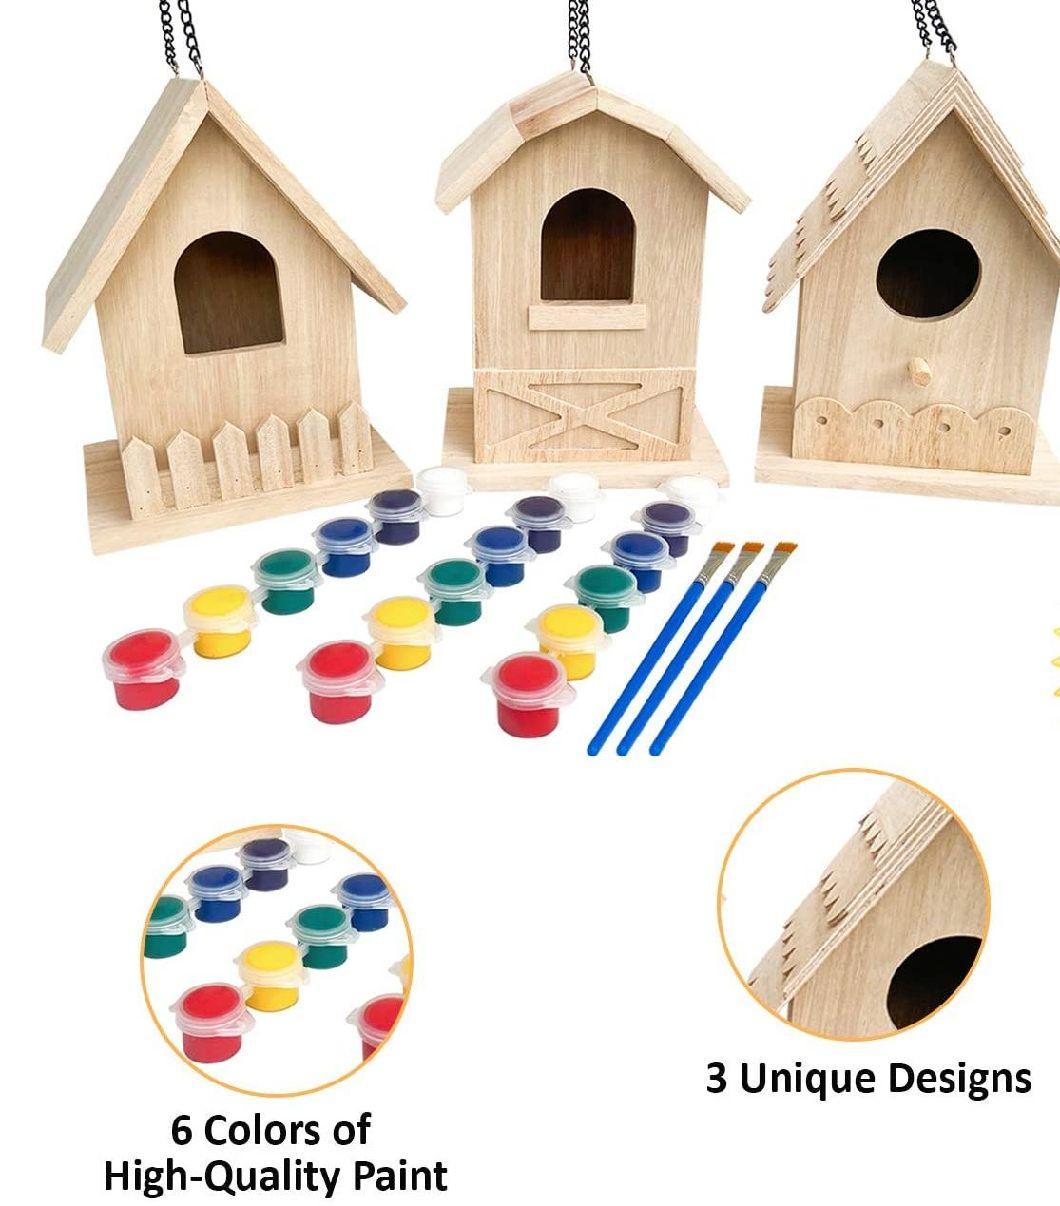 New Unfinished Wooden Birdhouse Wholesale Wooden Bluebird House